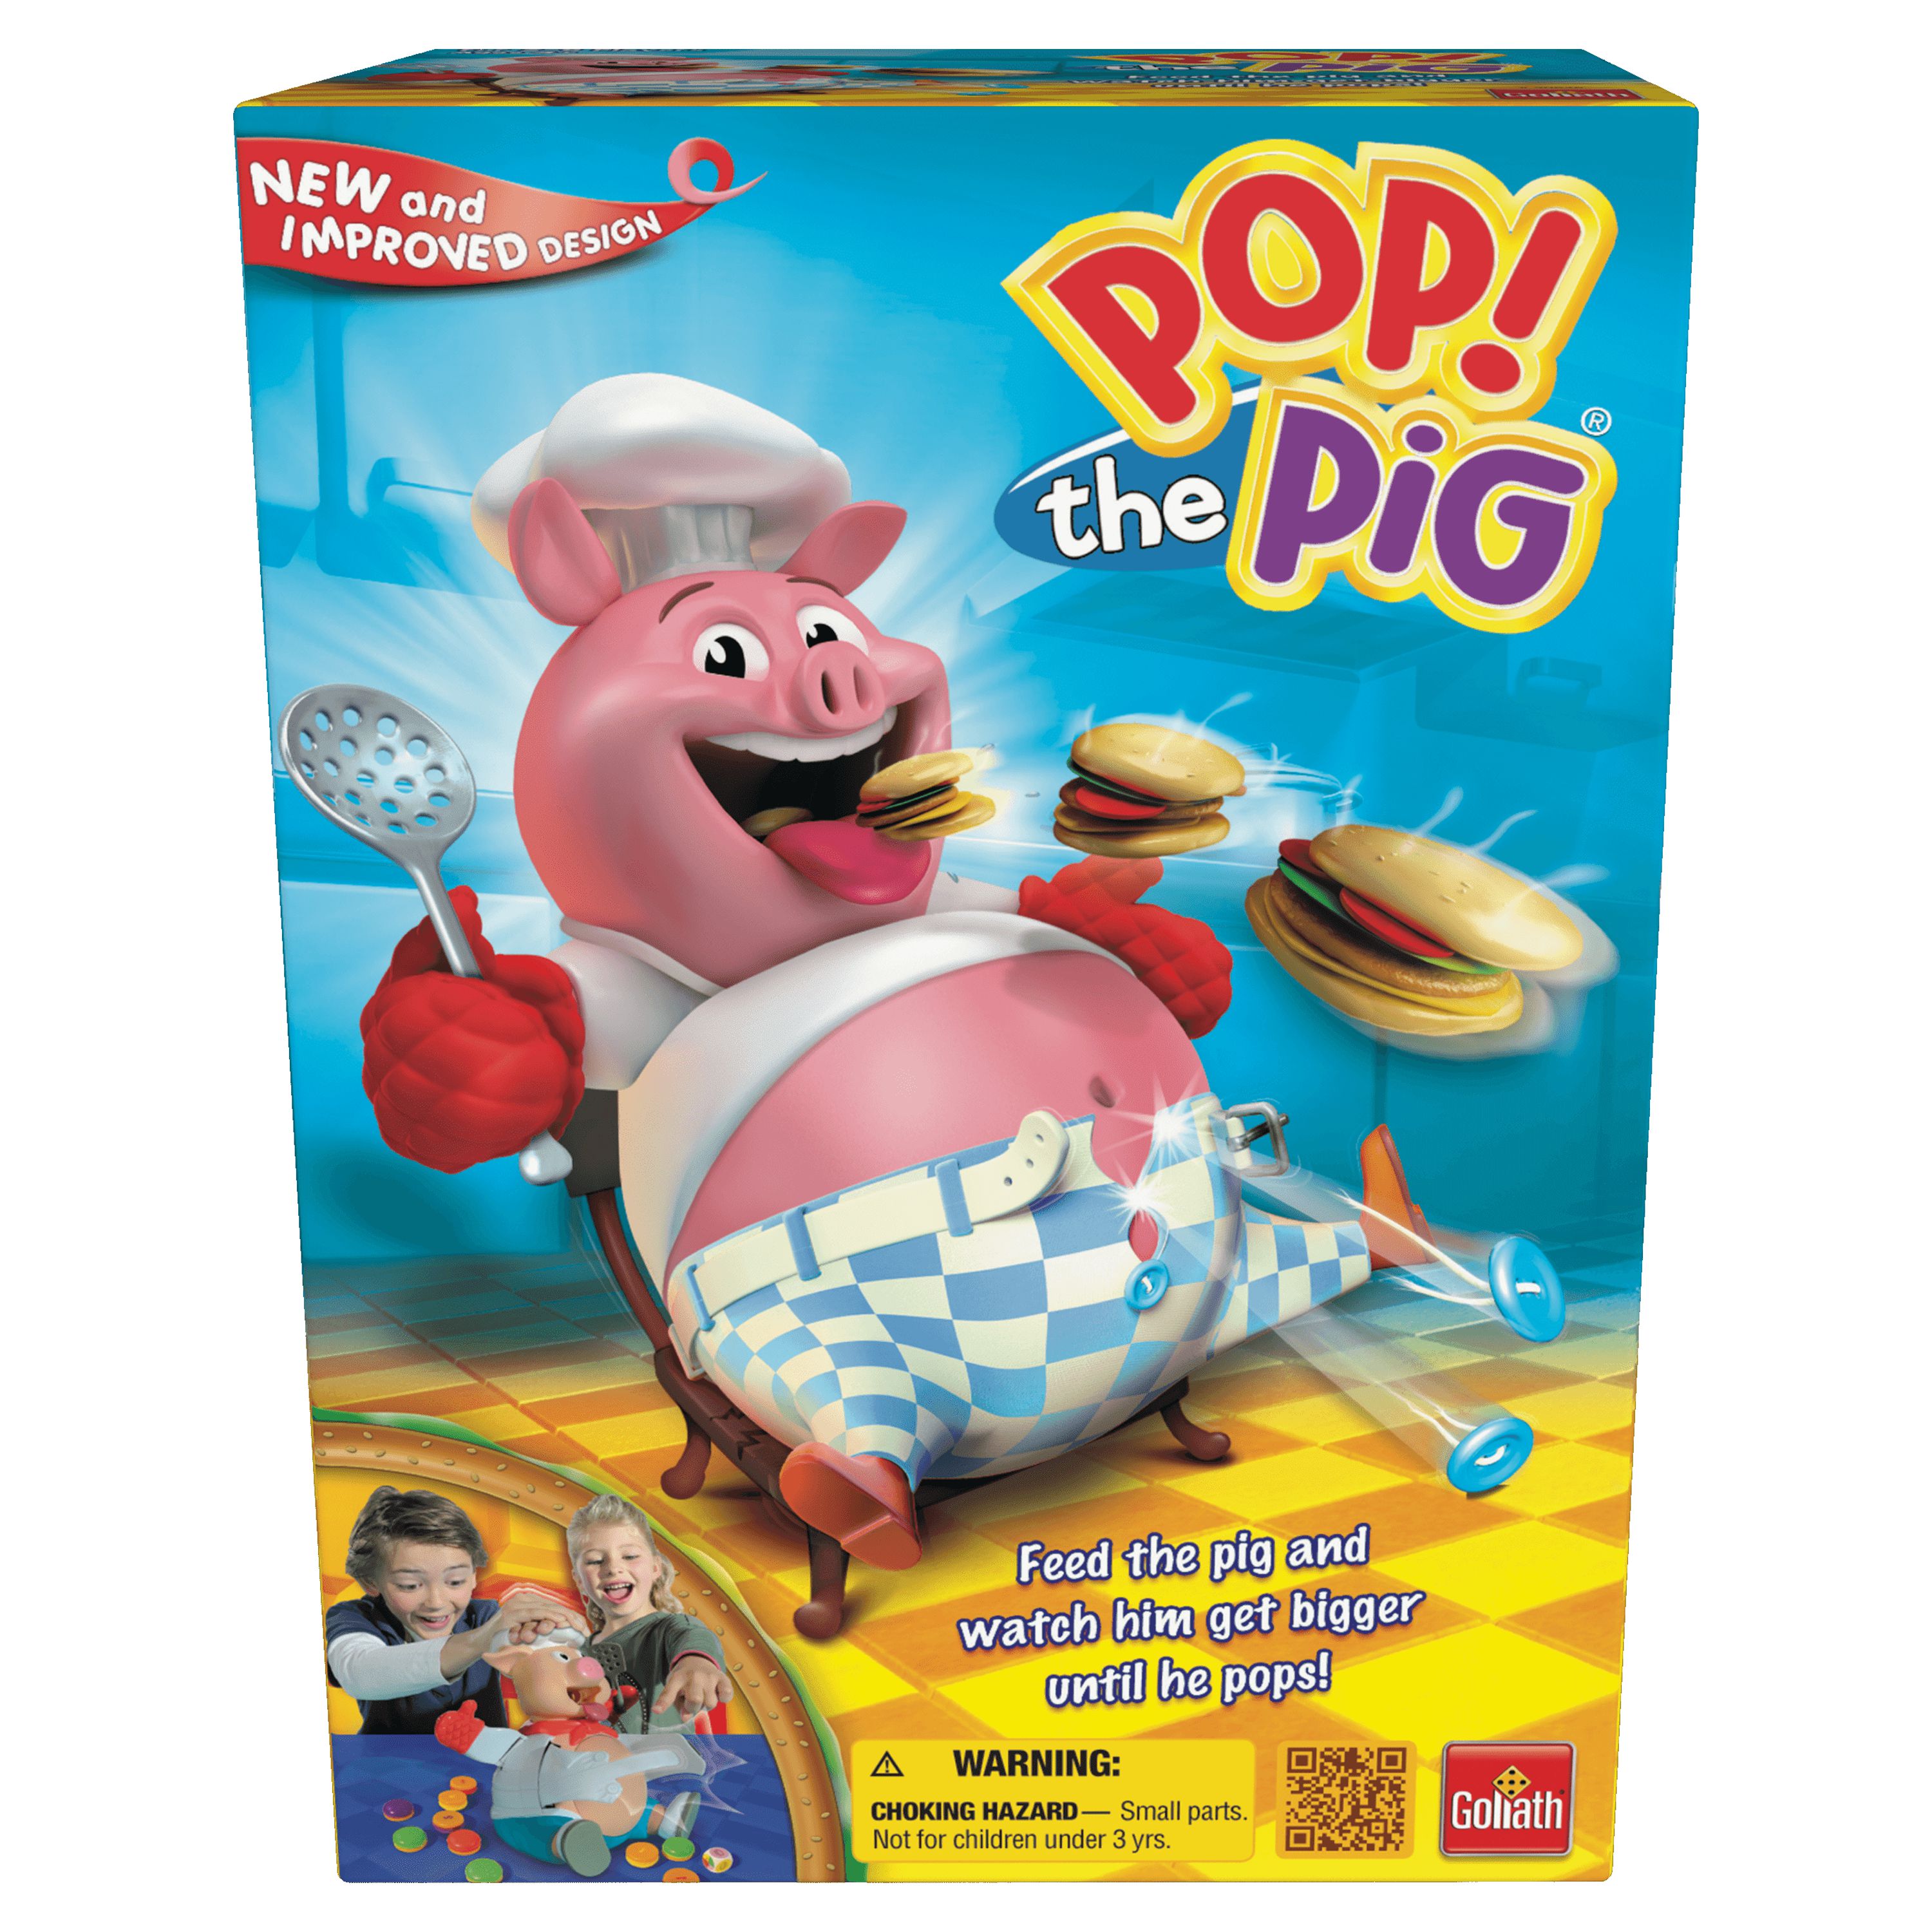 (2 pack) Goliath Pop the Pig Children's Game - Belly-Busting Fun, Feed Him Burgers, His Belly Grows - image 3 of 7